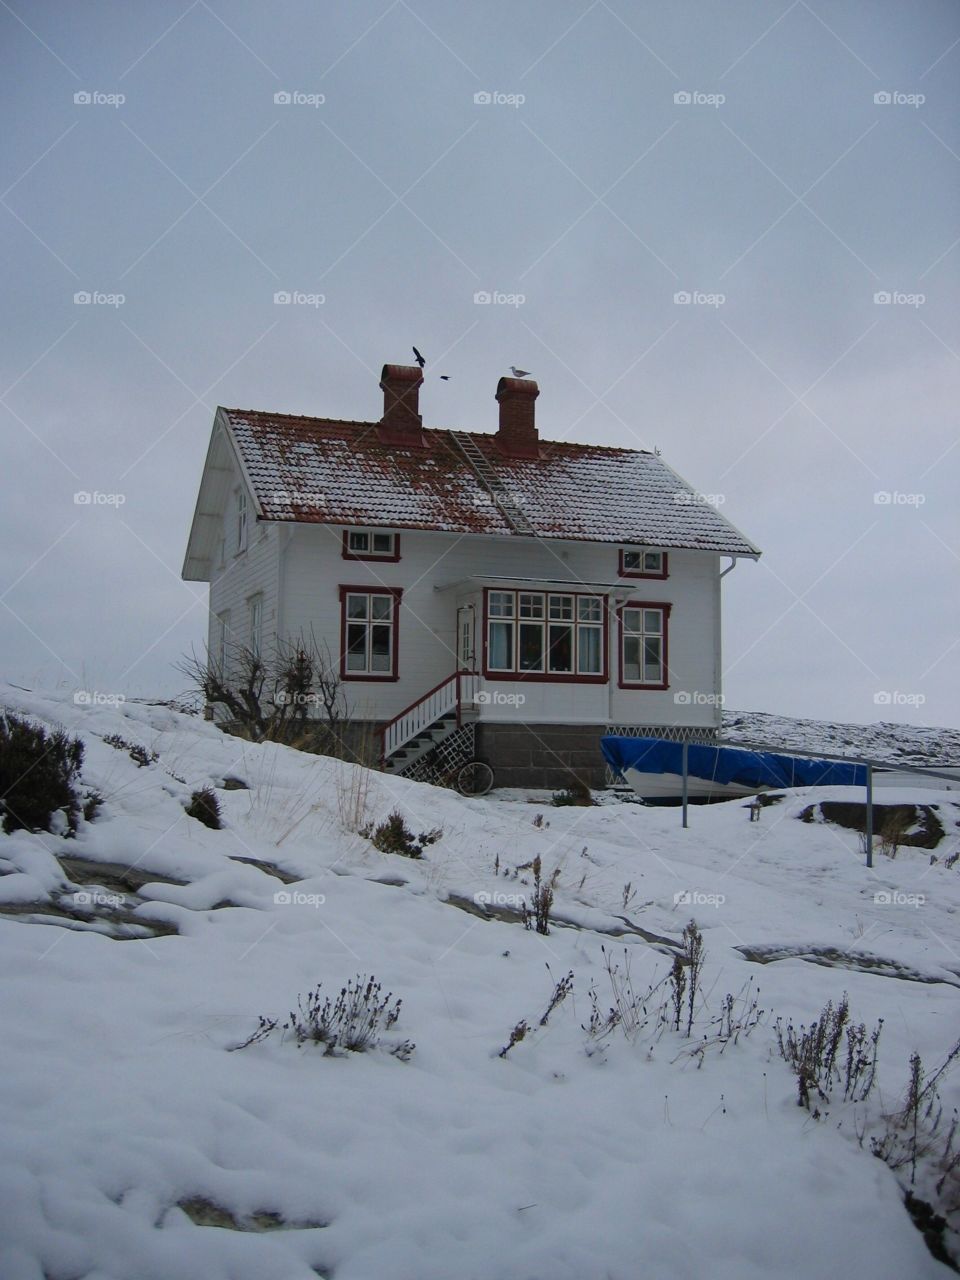 House covered in snow
